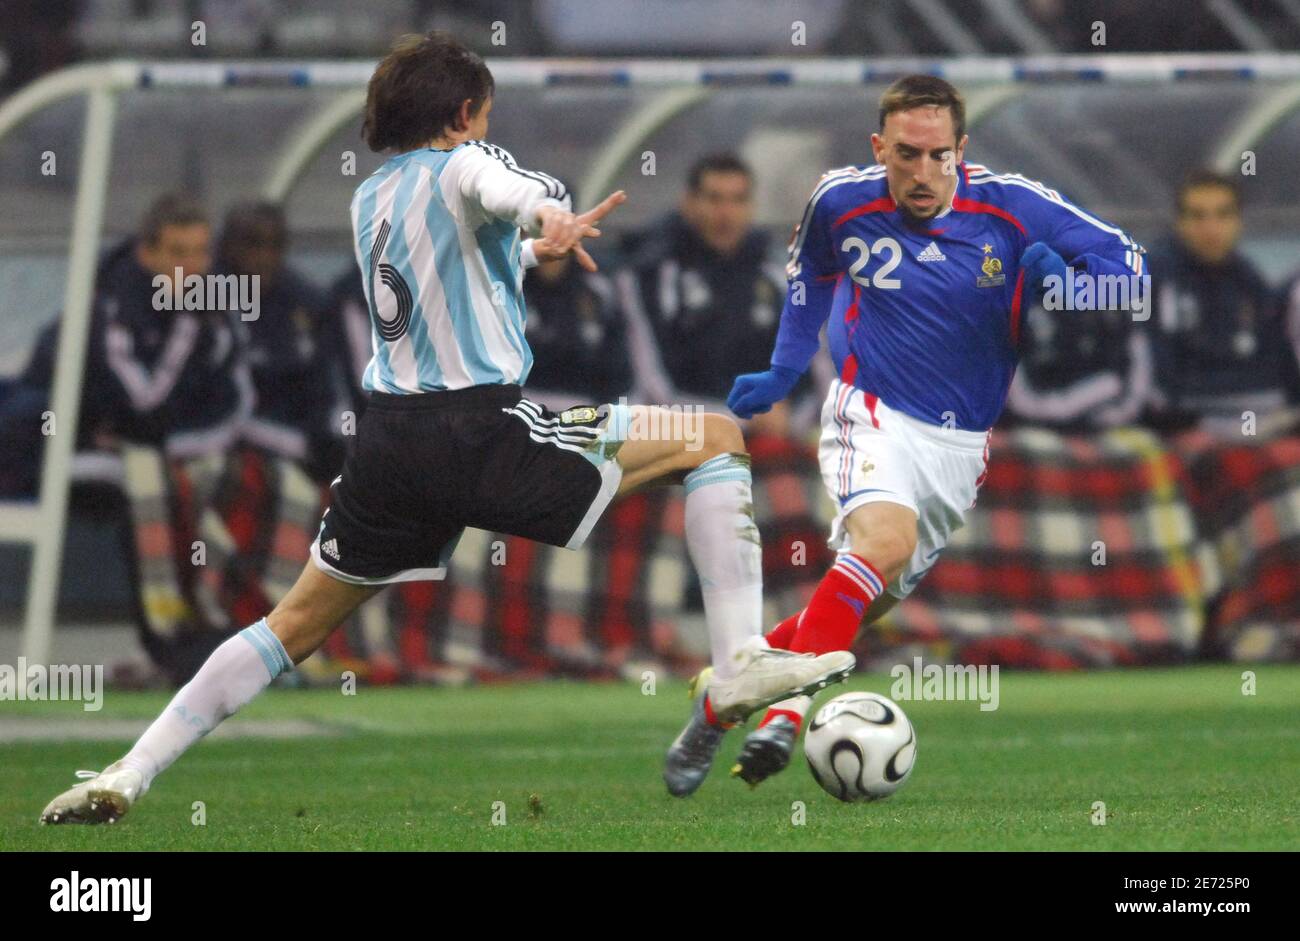 France's Franck Ribery and Argentina's Gabriel Heinze battle for the ball during the international friendly match, France vs Argentina at the stade de France, in Saint-Denis, near Paris, on February 7, 2007. Argentina won 1-0. Photo by Gouhier-Taamallah/Cameleon/ABACAPRESS.COM Stock Photo